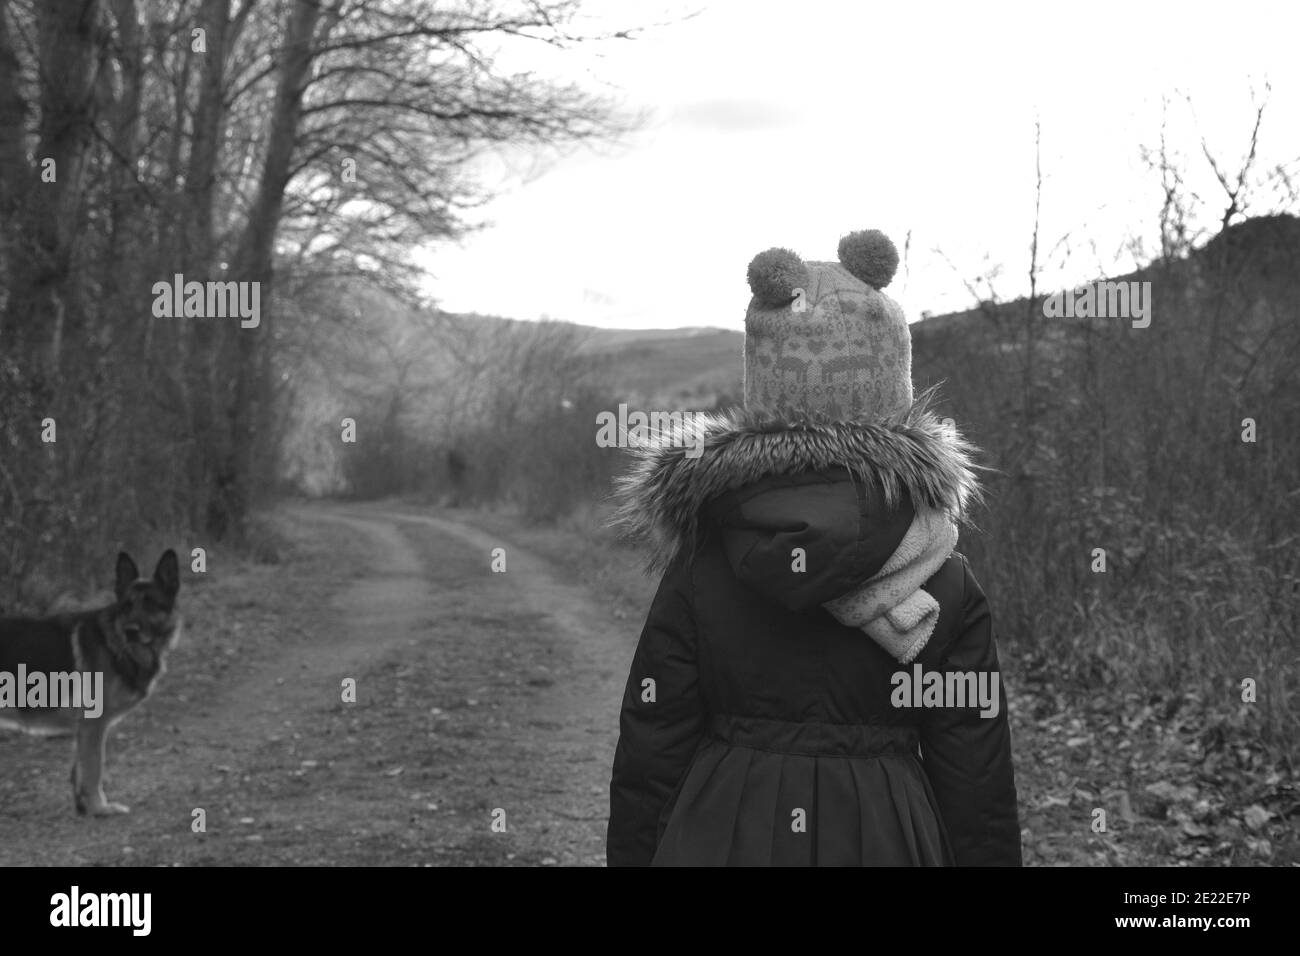 Five-year-old girl with her back turned on a rural road. Black and white photo. Munilla, La Rioja, Spain. Stock Photo